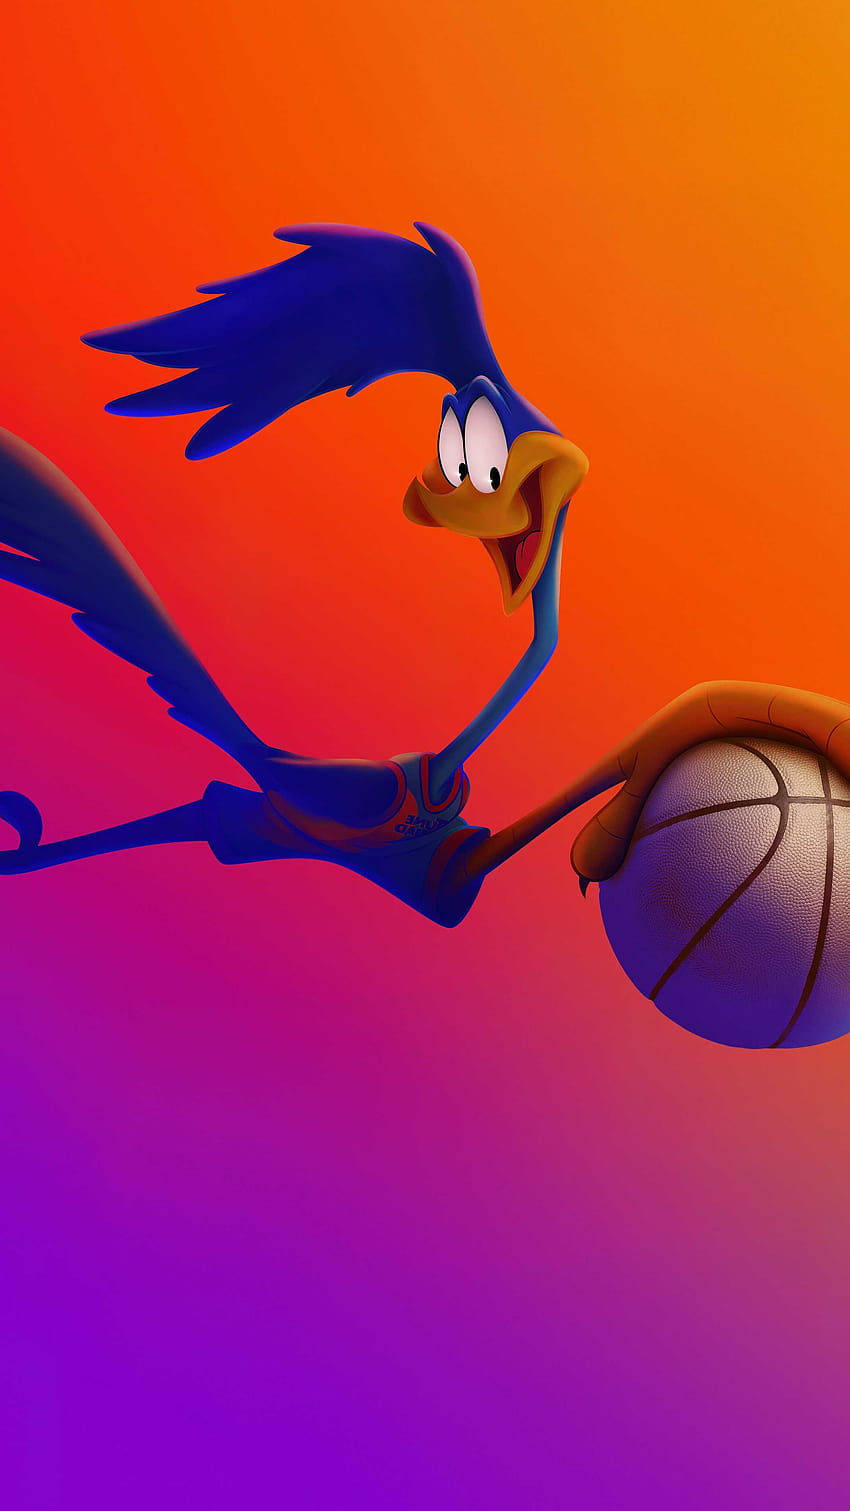 Road Runner High Resolution HD Wallpapers  All HD Wallpapers  Looney  tunes Looney tunes characters Classic cartoon characters